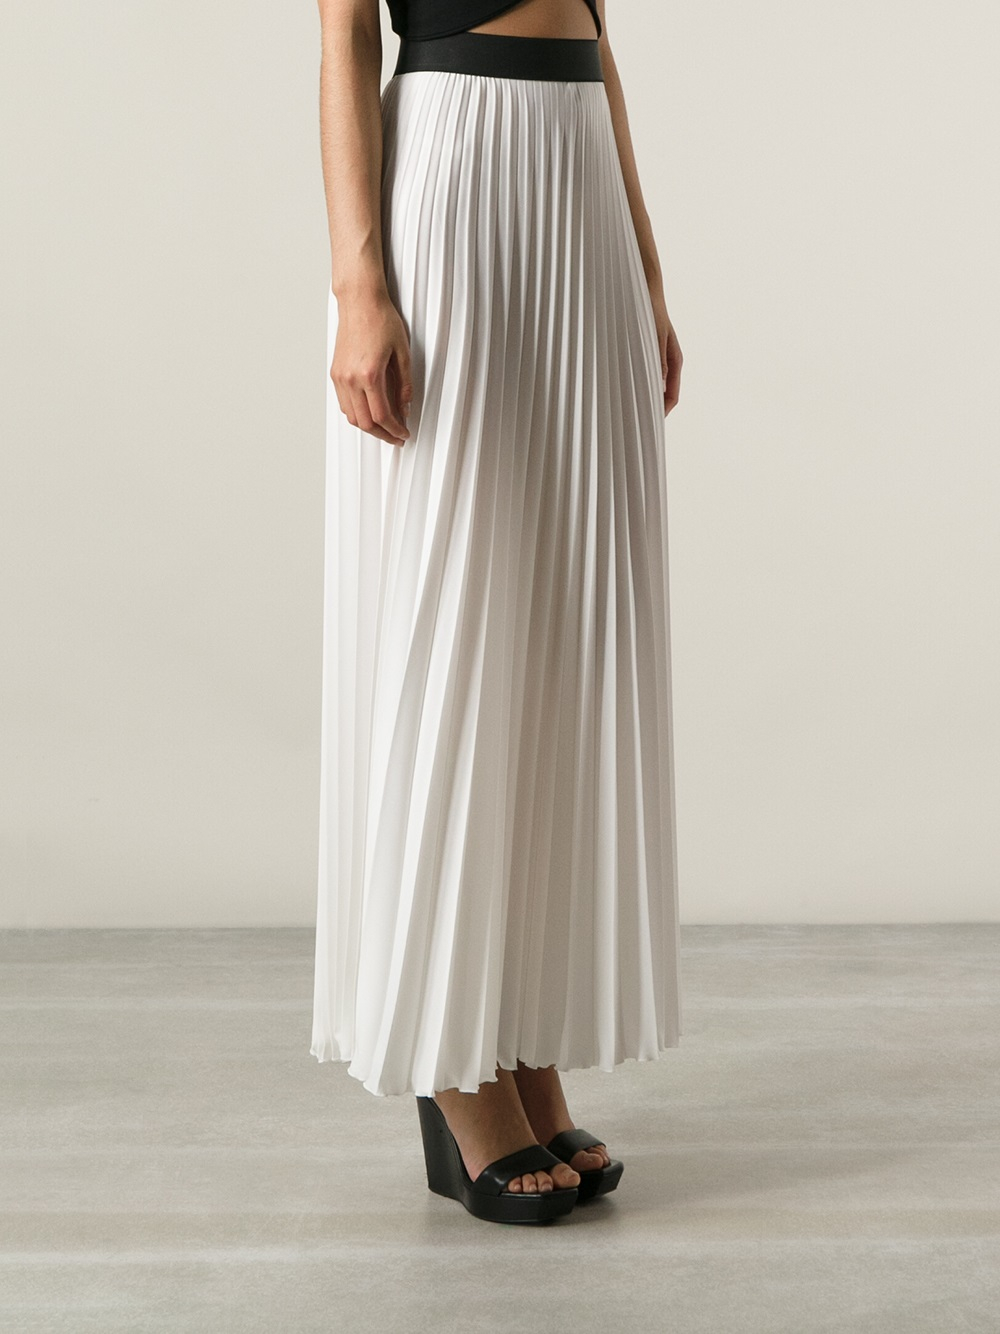 P.A.R.O.S.H. Long Pleated Skirt in White | Lyst UK